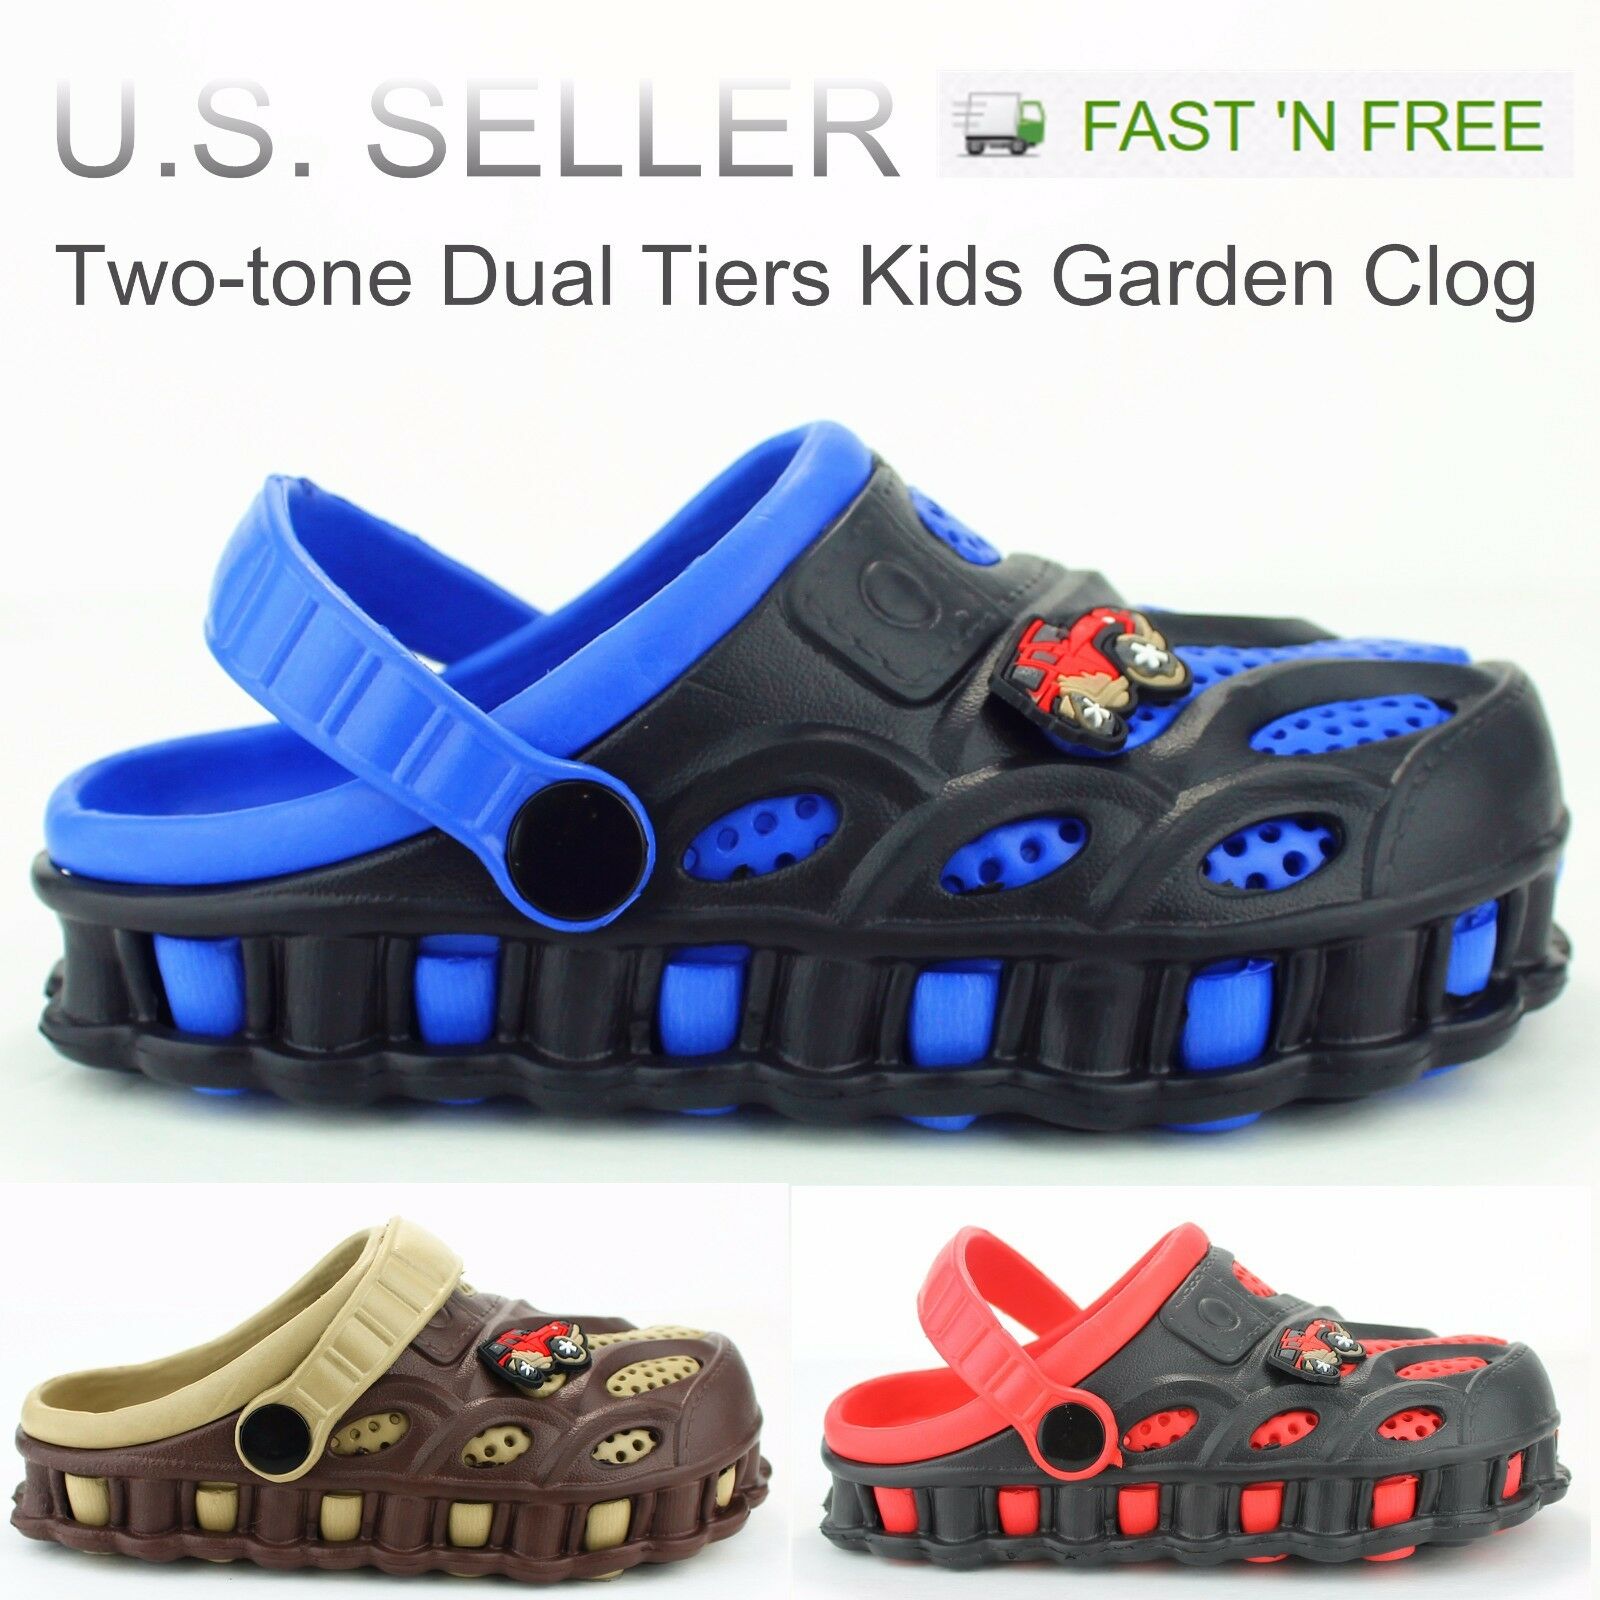 Garden Clogs Shoes For Boys Kids Toddler Slip-on Casual Two-tone Slipper Sandals